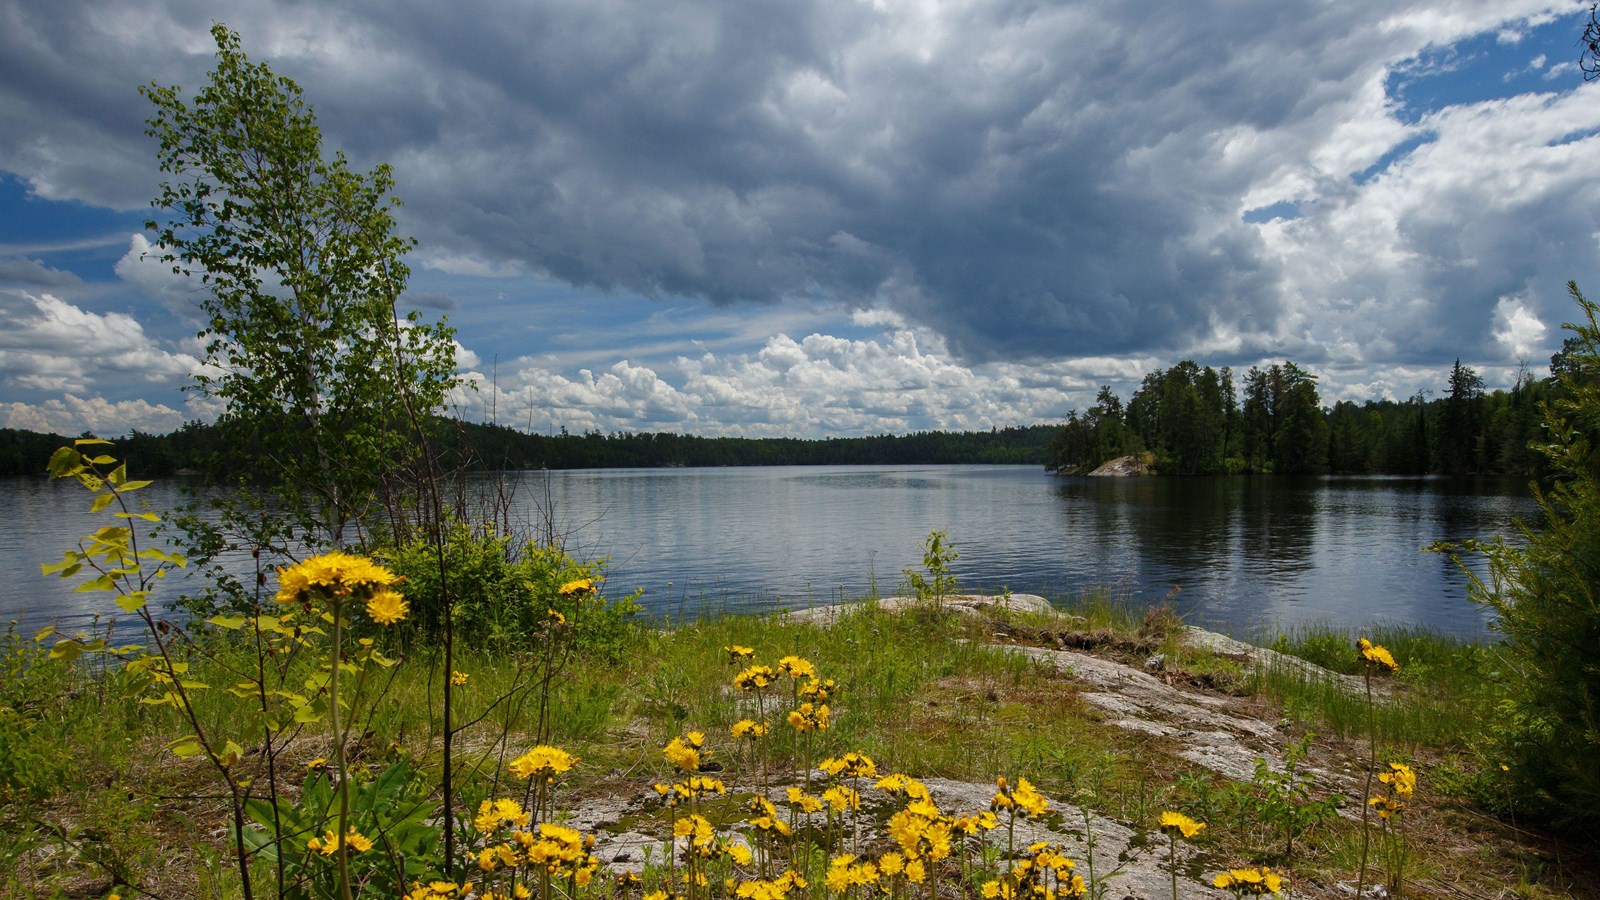 A view of a lake on an overcast day. Yellow flowers are in the foreground on a rocky shoreline.